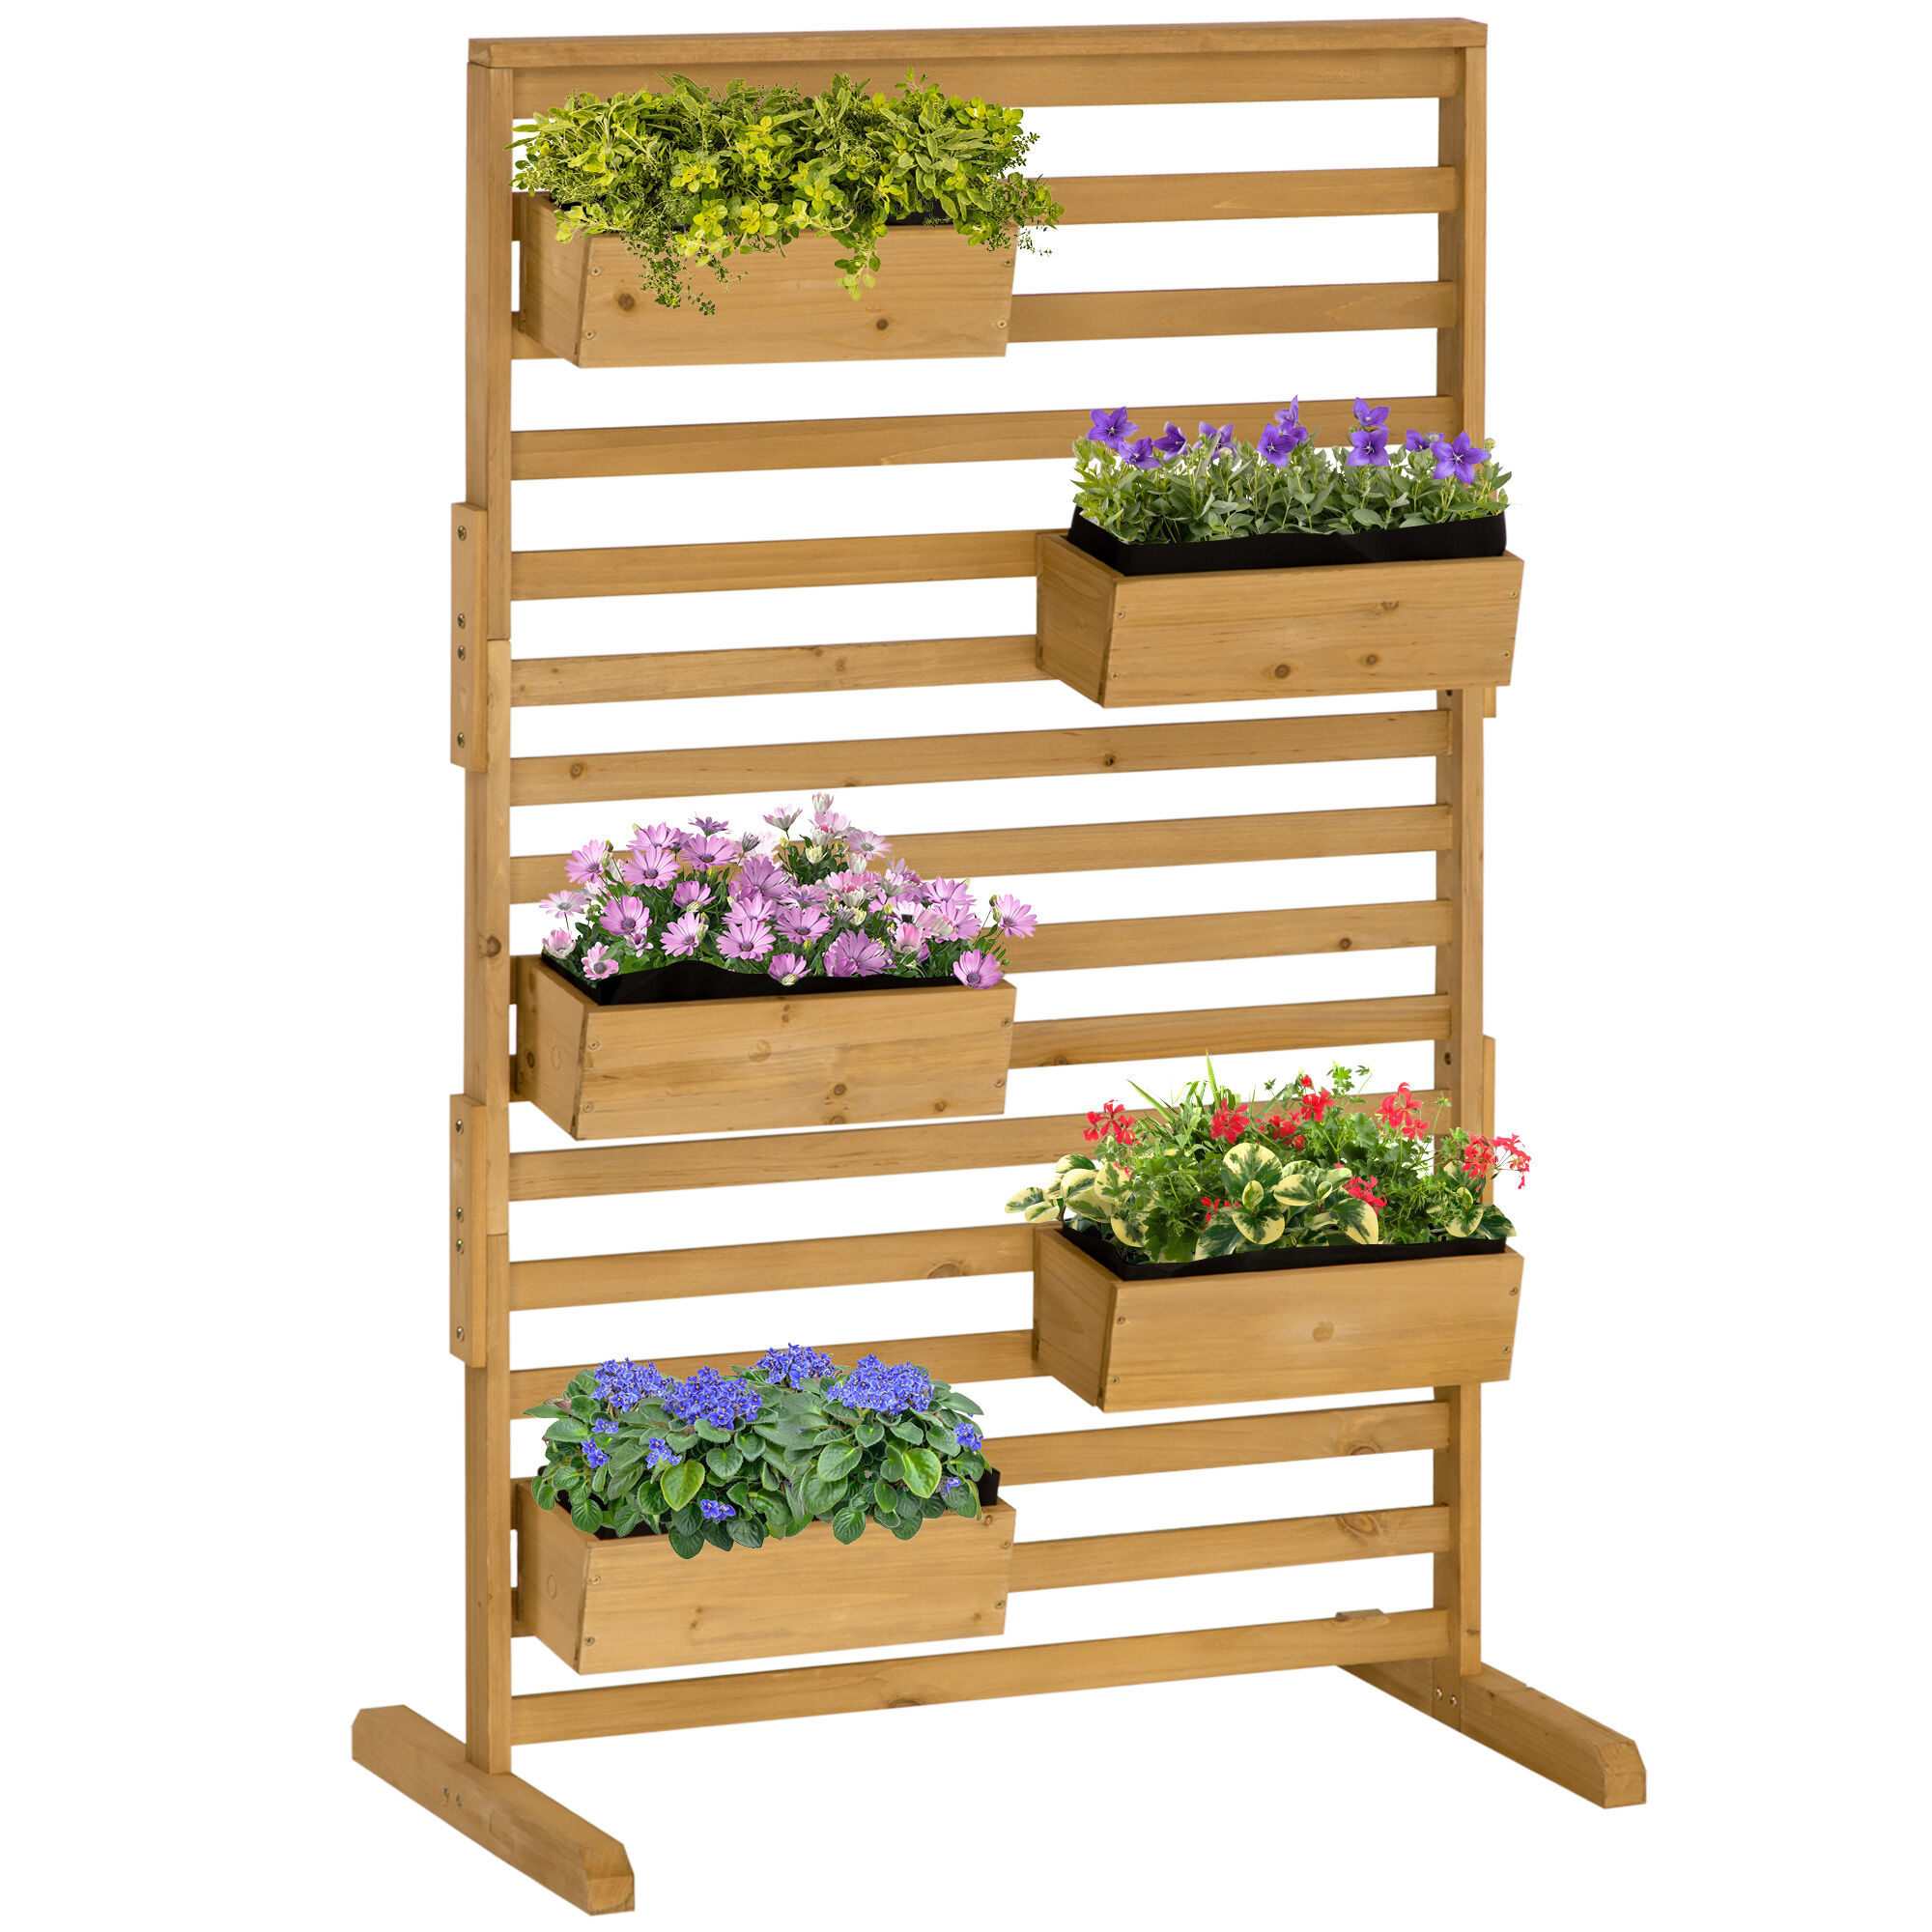 Outsunny Outdoor Plant Stand with 5 Hanging Flower Boxes for Climbing Plants, Freestanding Wooden Lattice for Patio, Porch